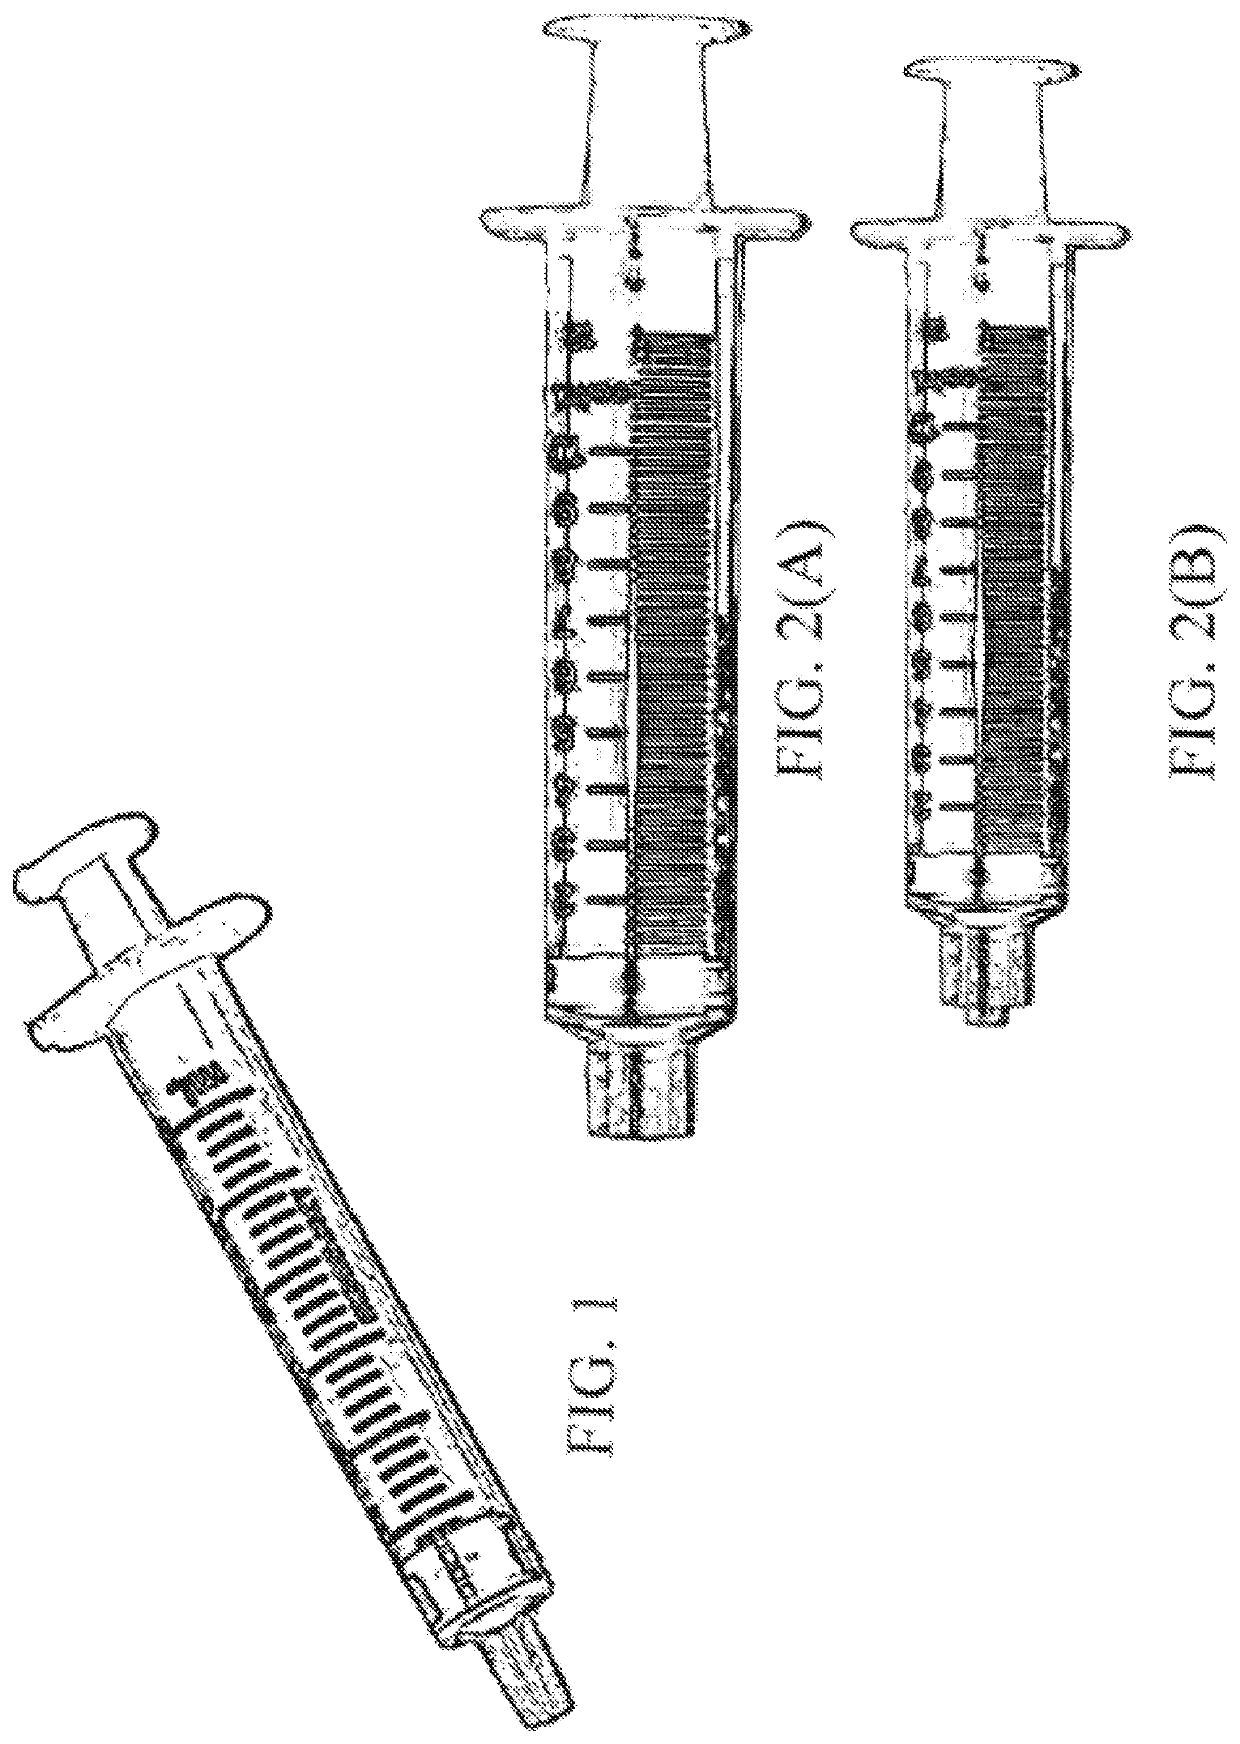 Push-pull medication container adapter cap for enteral syringe filling systems